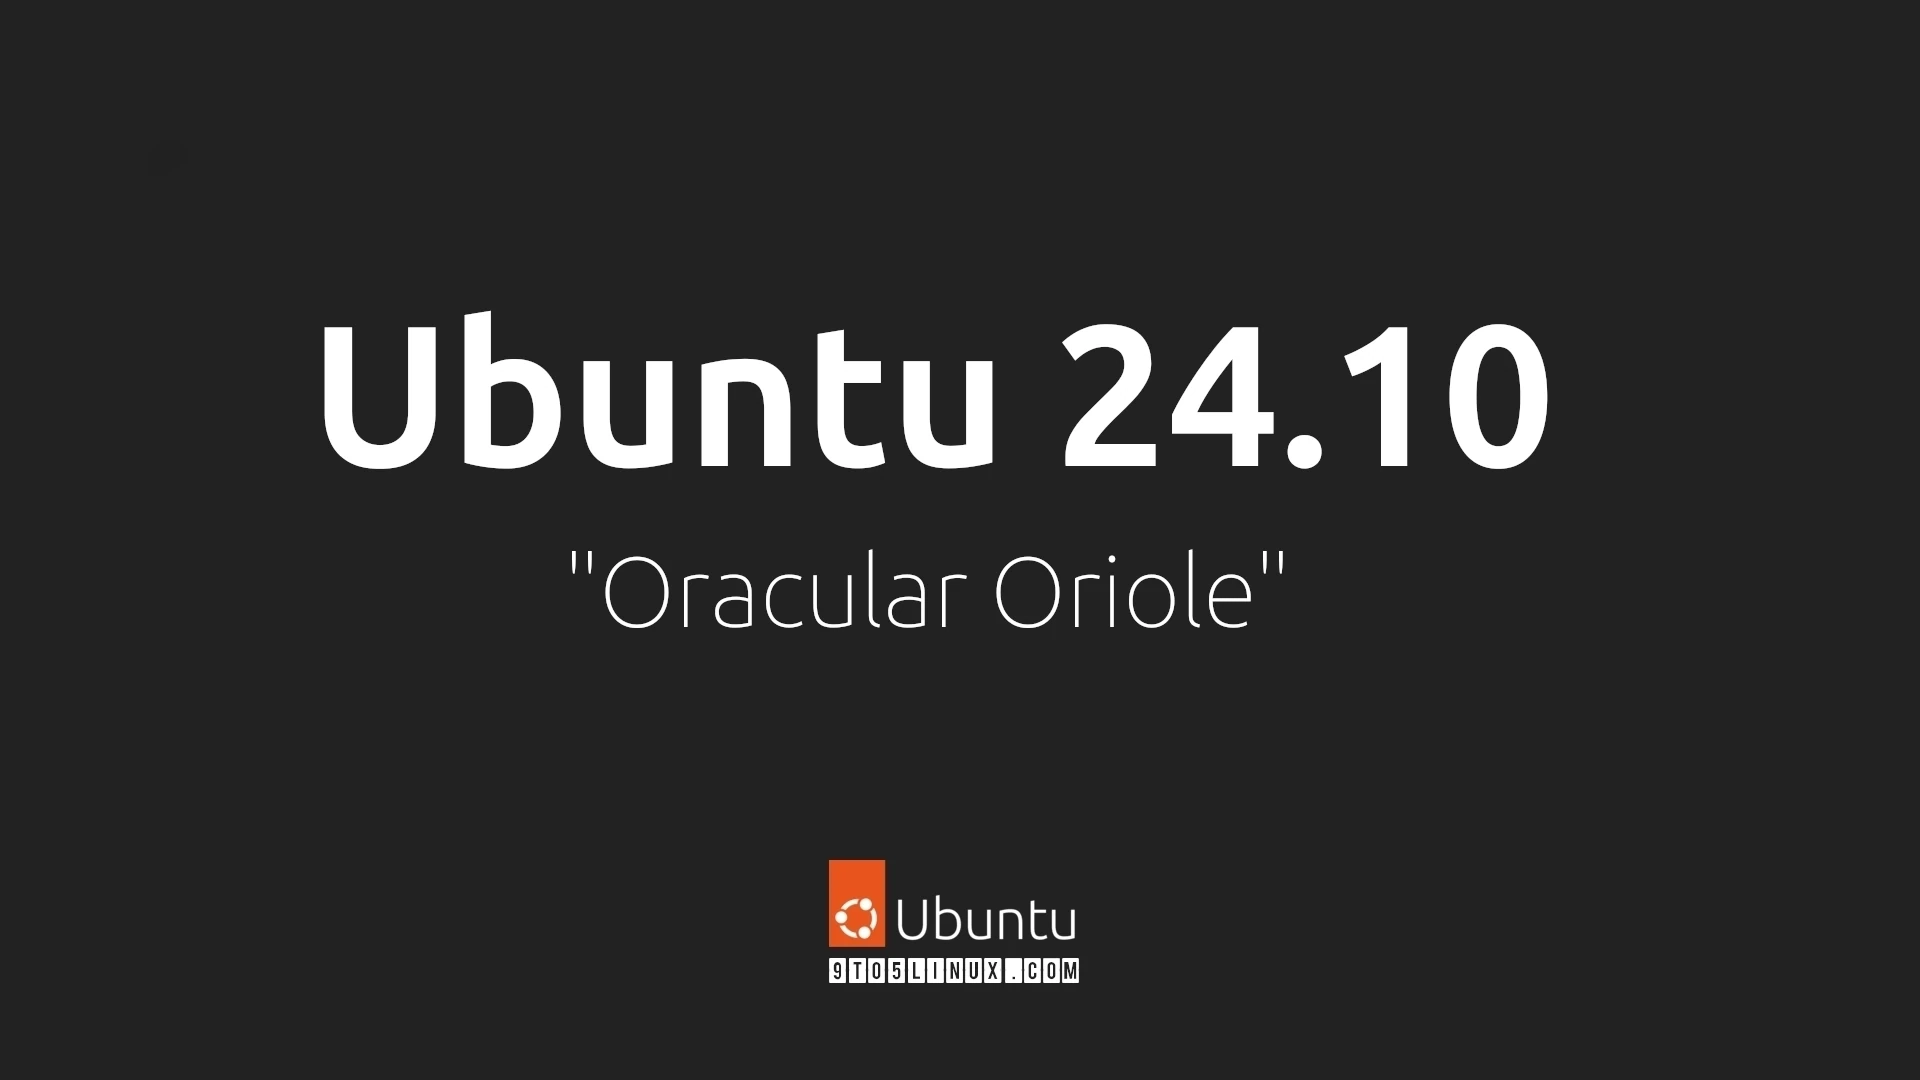 The Scheduled Release of Ubuntu 24.10 “Oracular Oriole” on October 10th, 2024